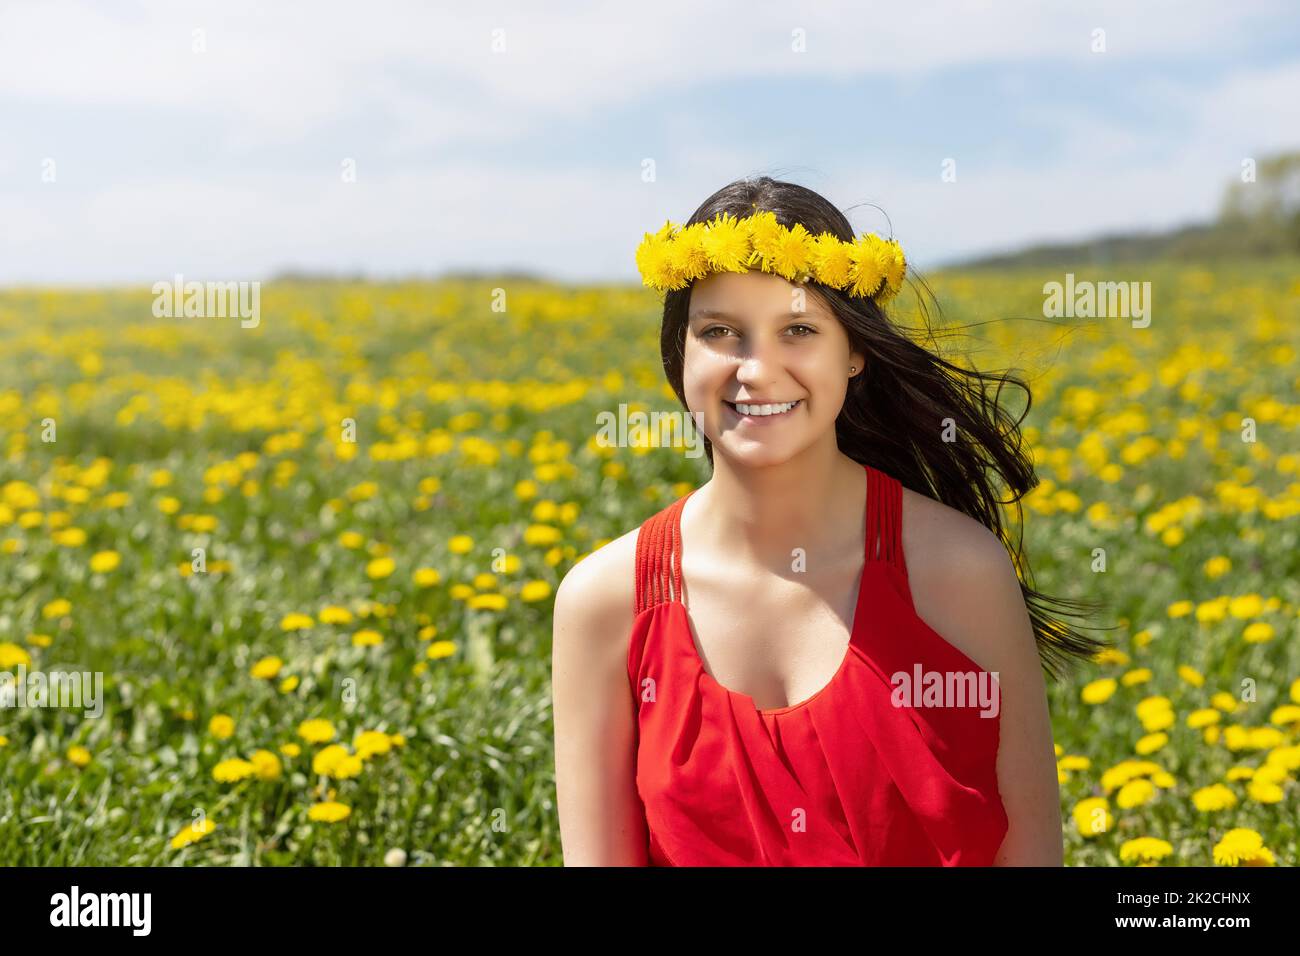 Laughing young girl posing in dandelion meadow. Stock Photo